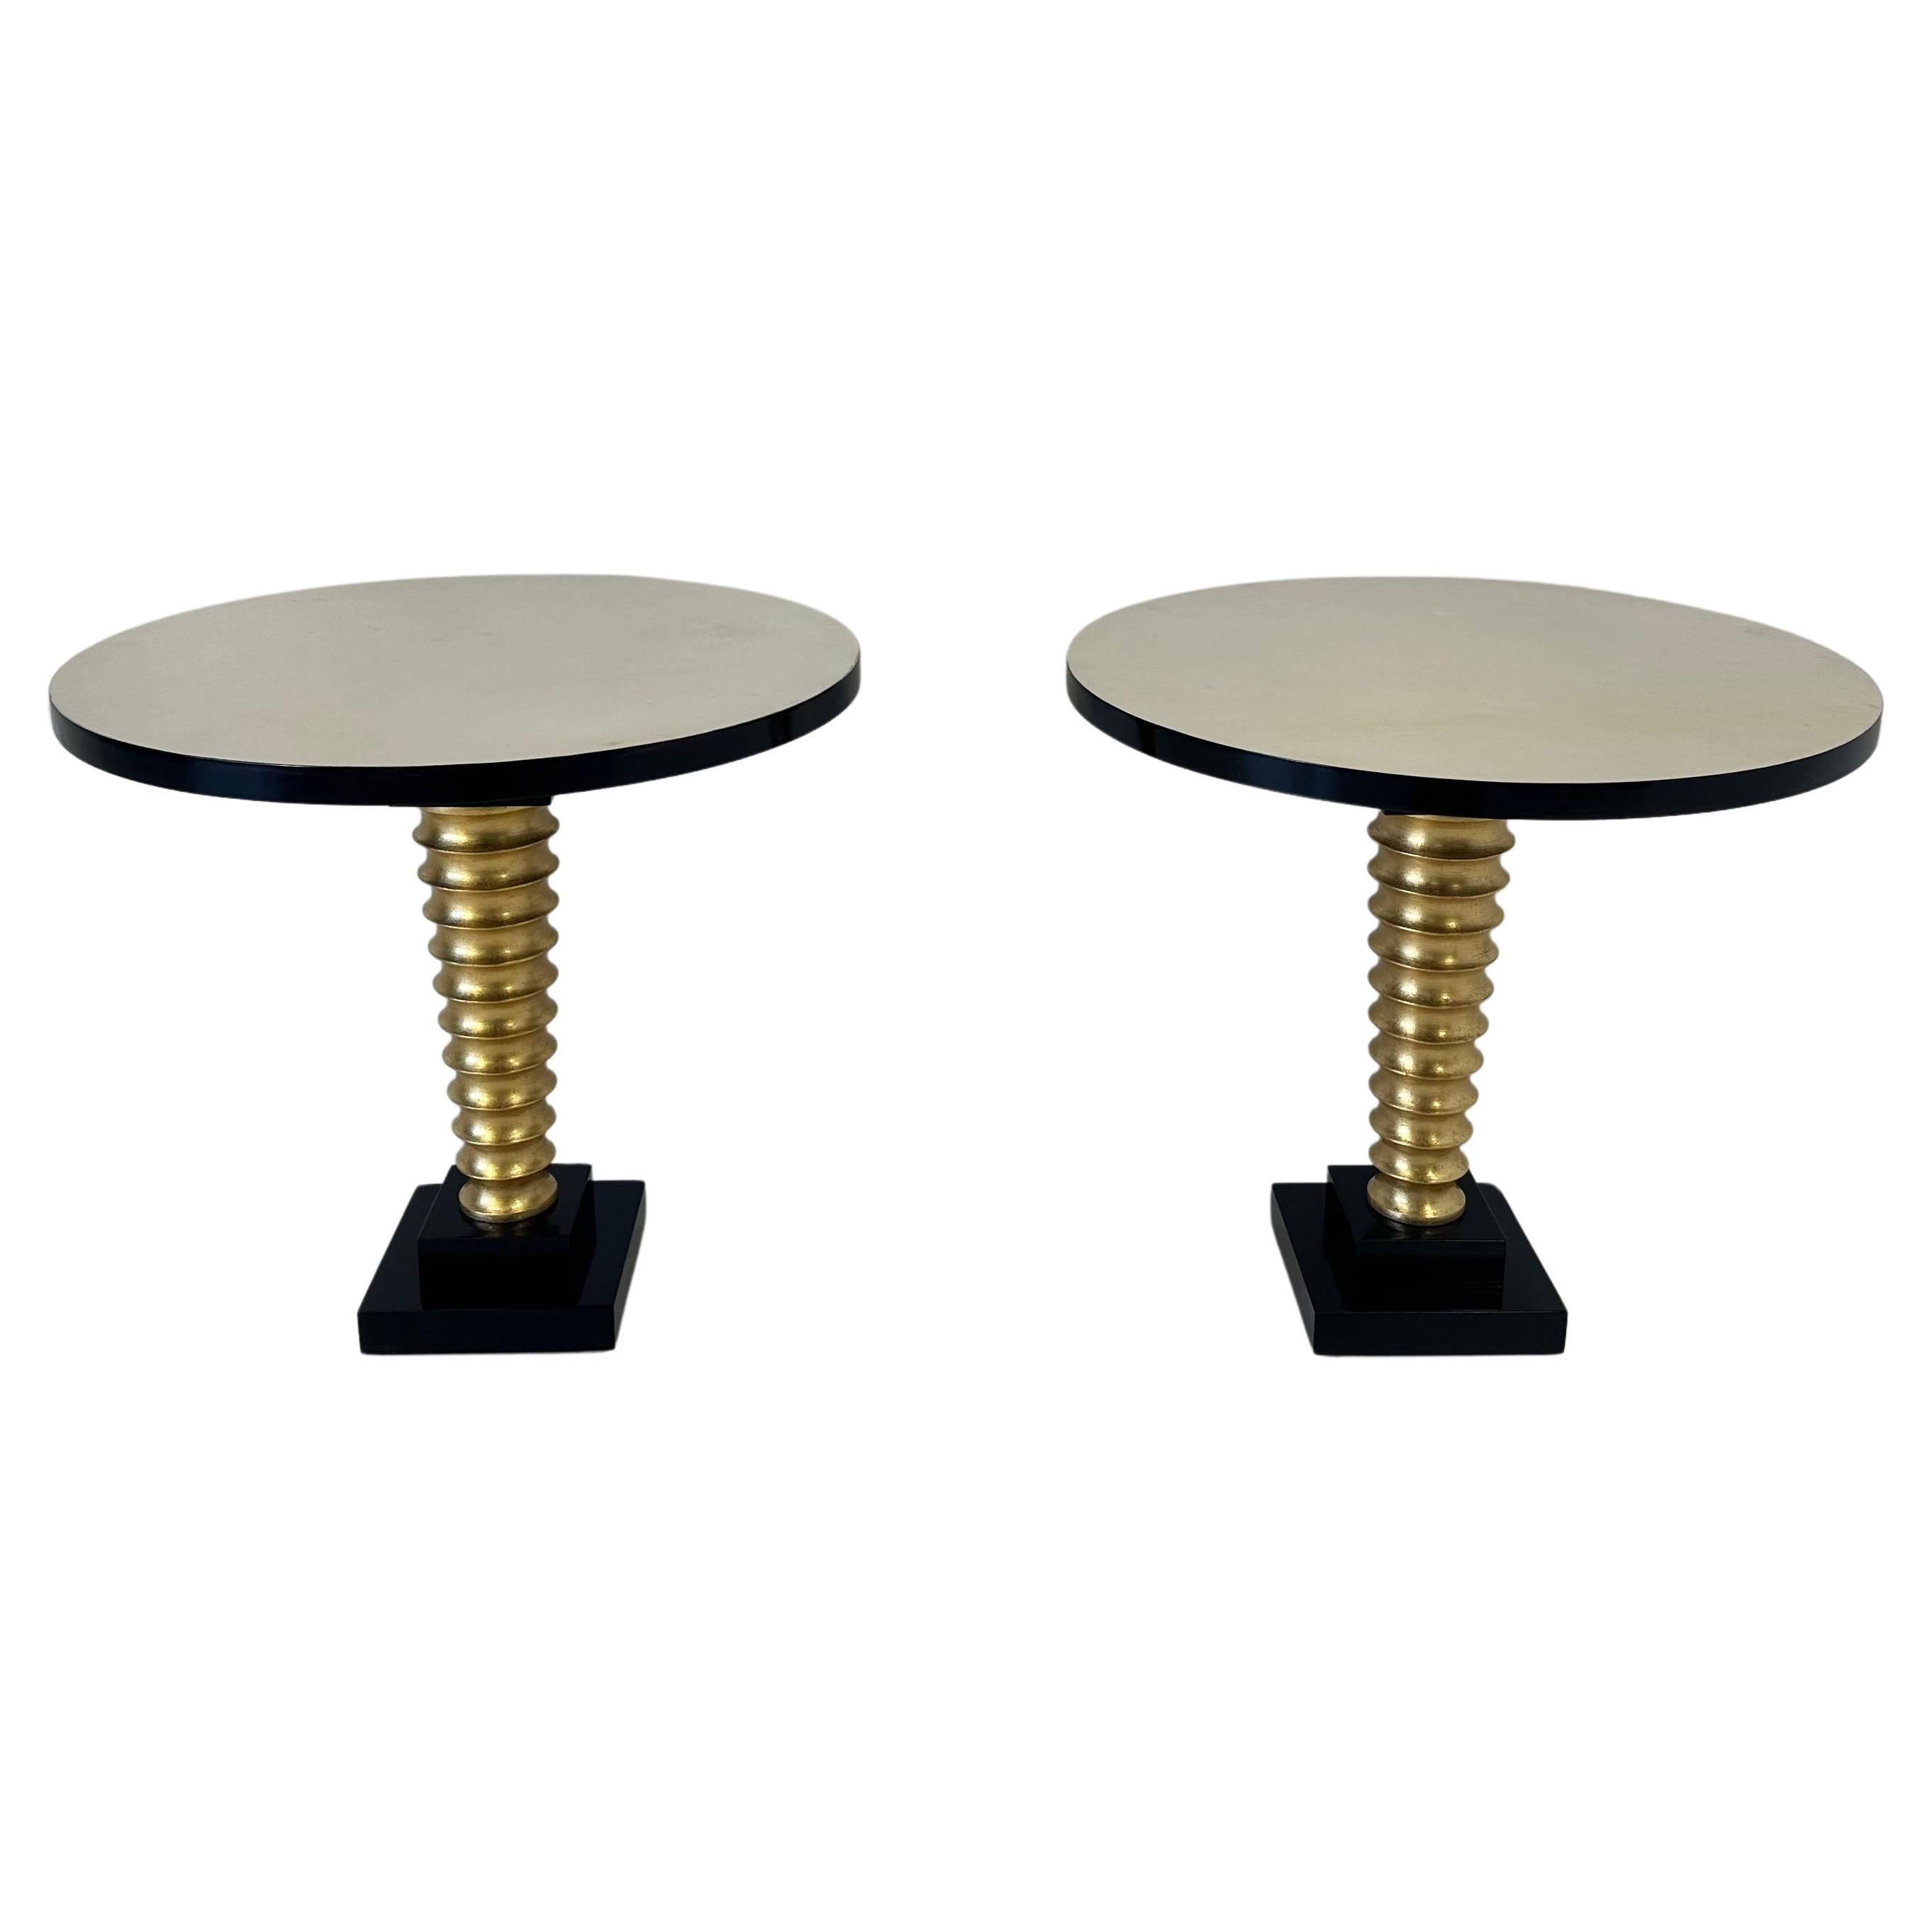 Italian Art Deco Style Parchment, Gold Leaf and Black Lacquer Coffee Tables 